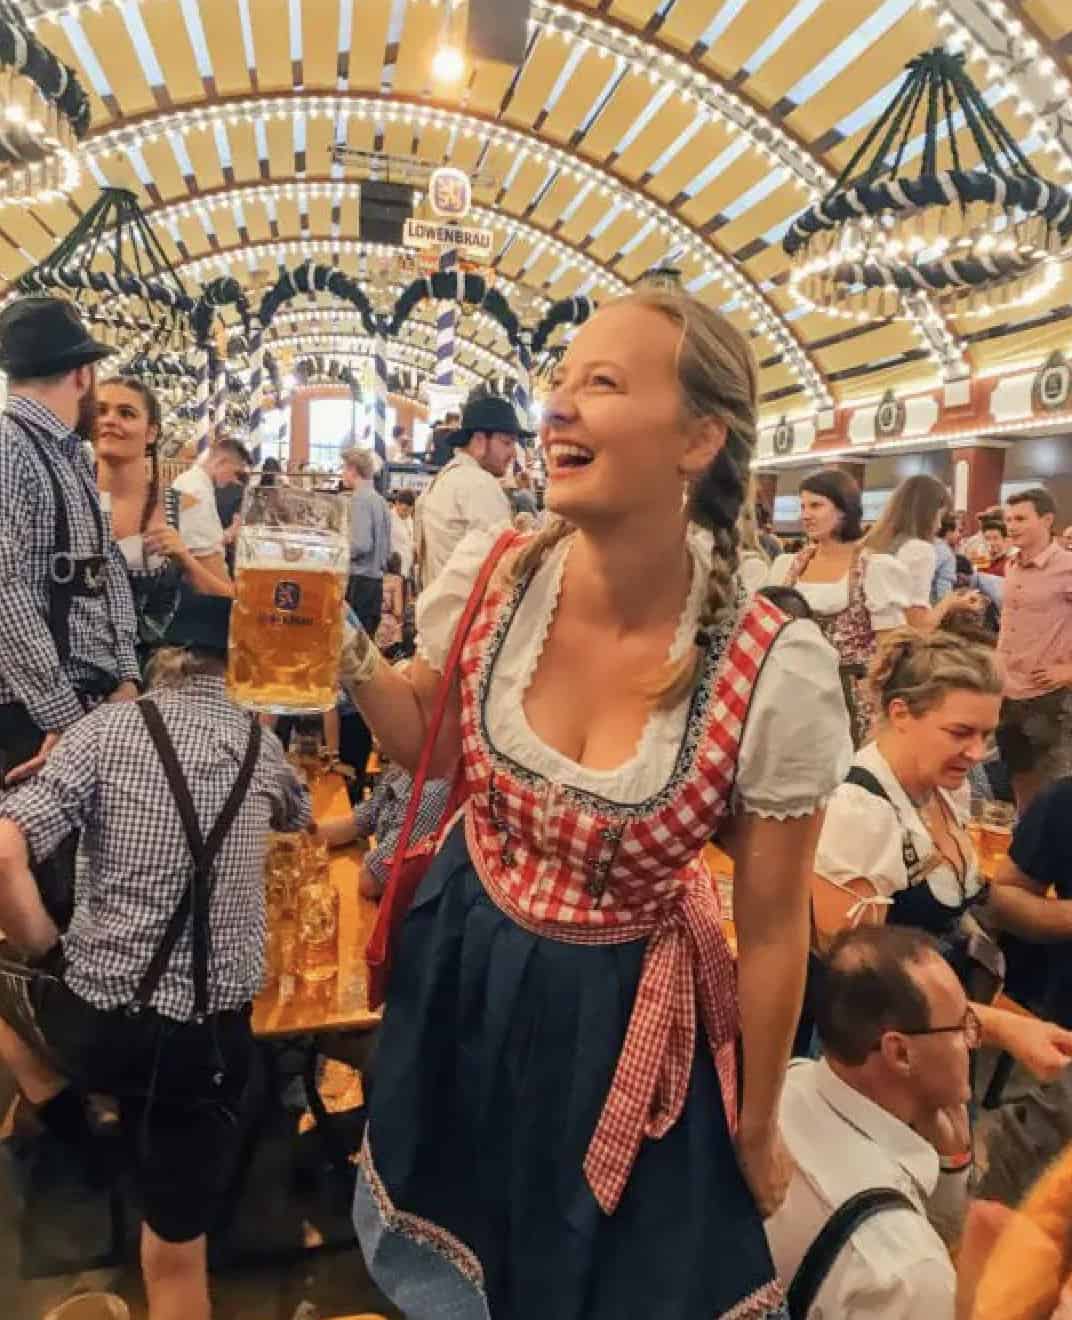 Oktoberfest In Germany Is The World's Largest Beer Festival ...